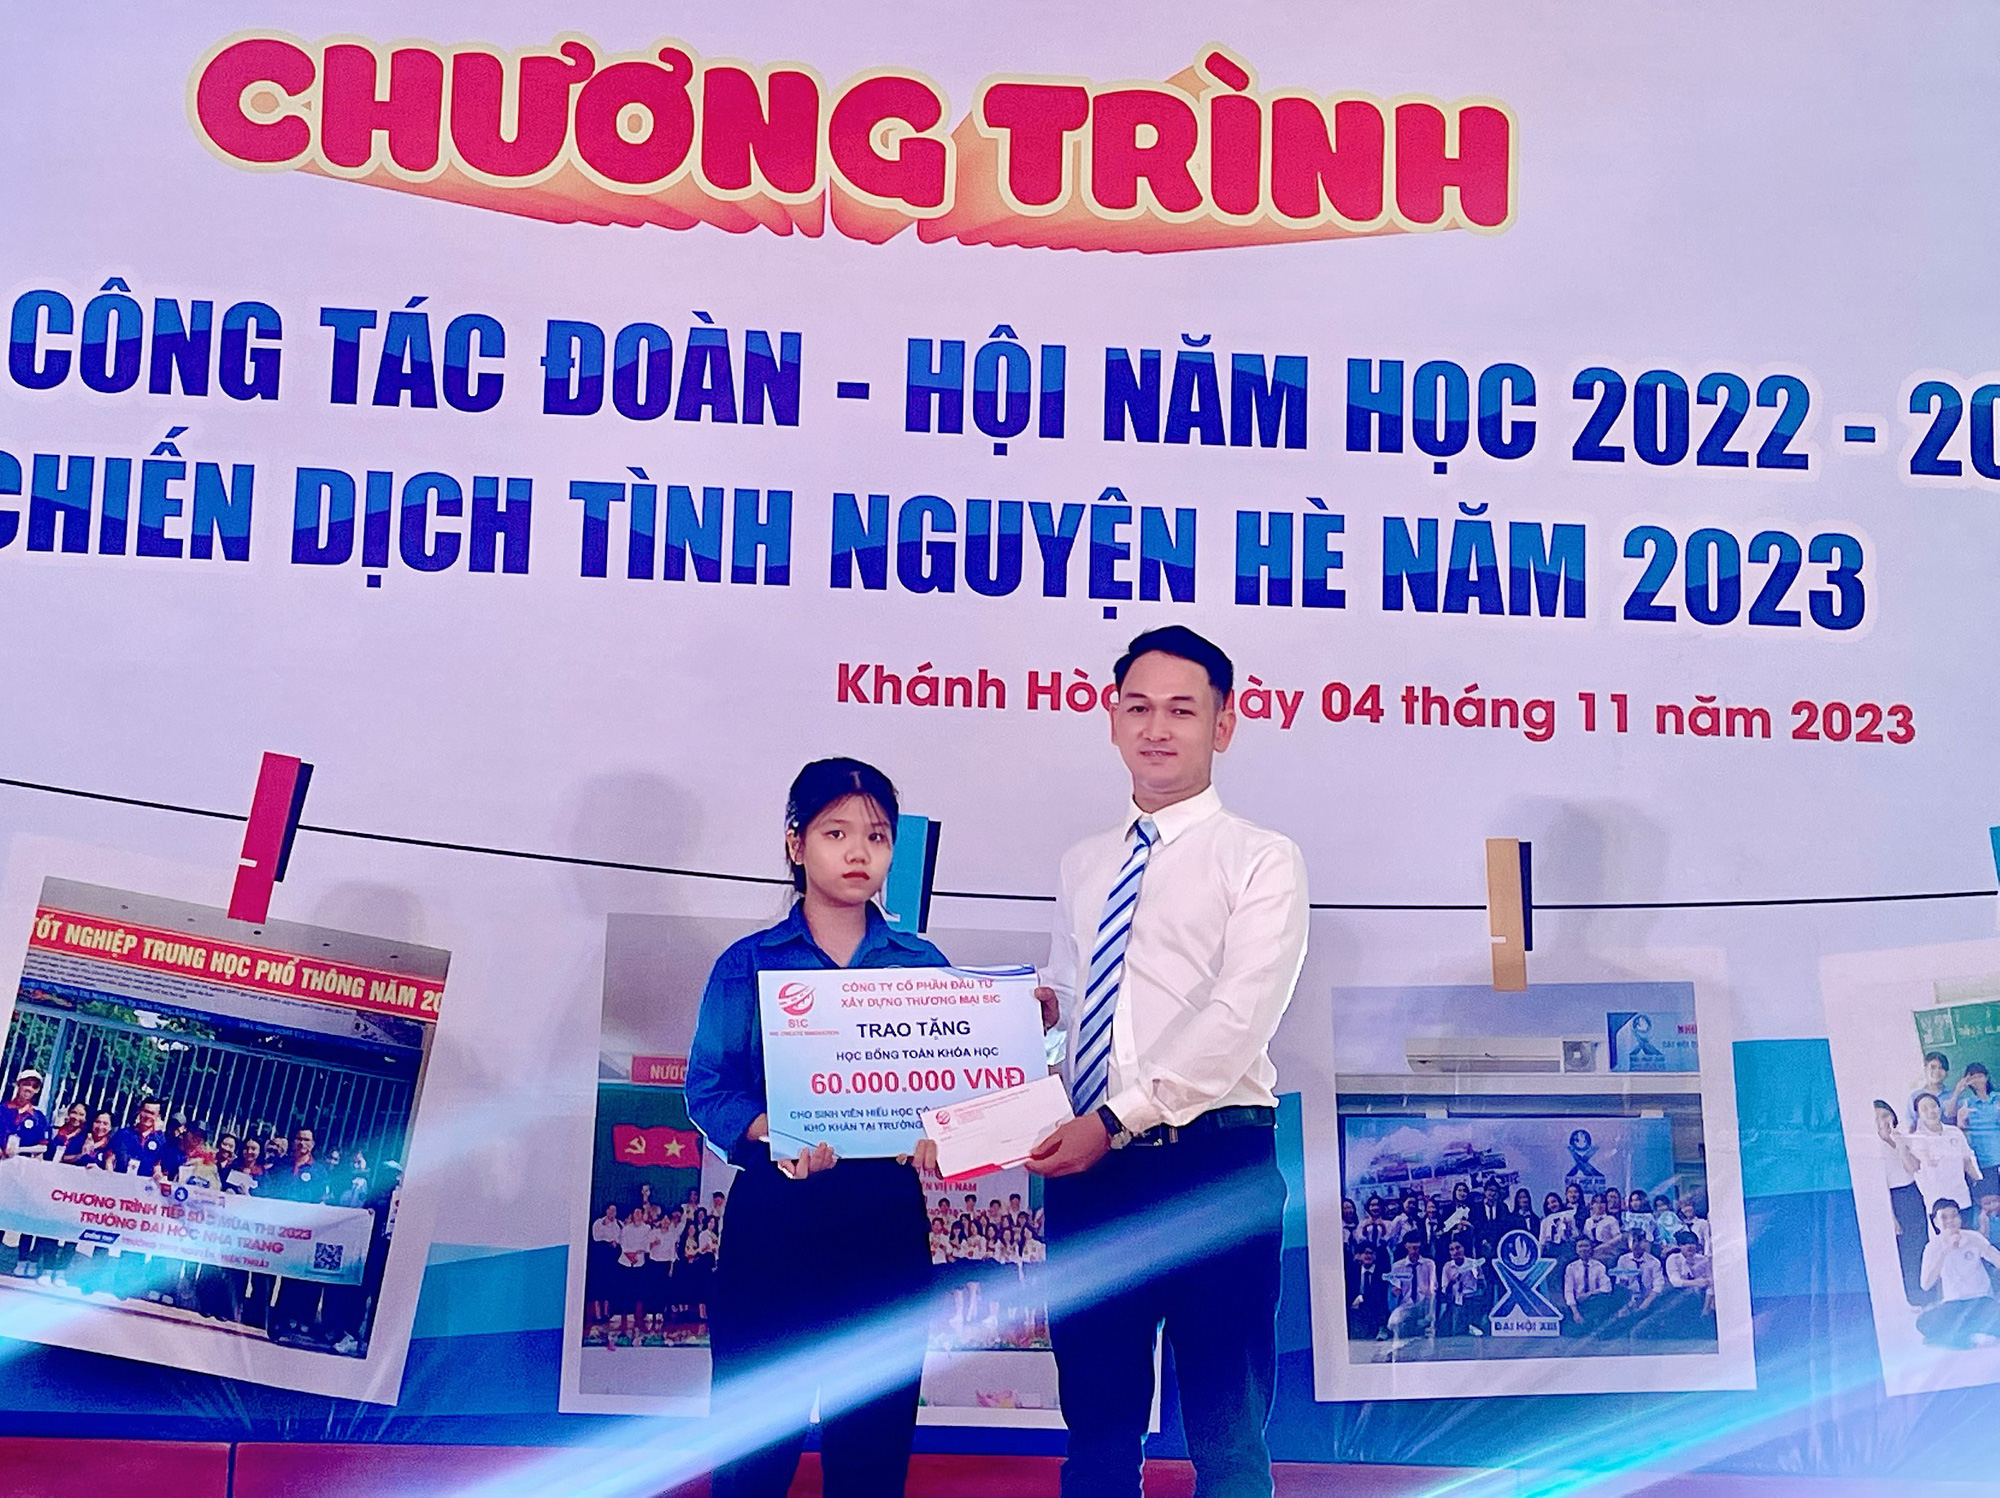 A representative of SIC Commercial Construction Investment Joint Stock Company presented a scholarship to Le Thi Thuy Hang, a new student of Nha Trang University - Photo: SIC